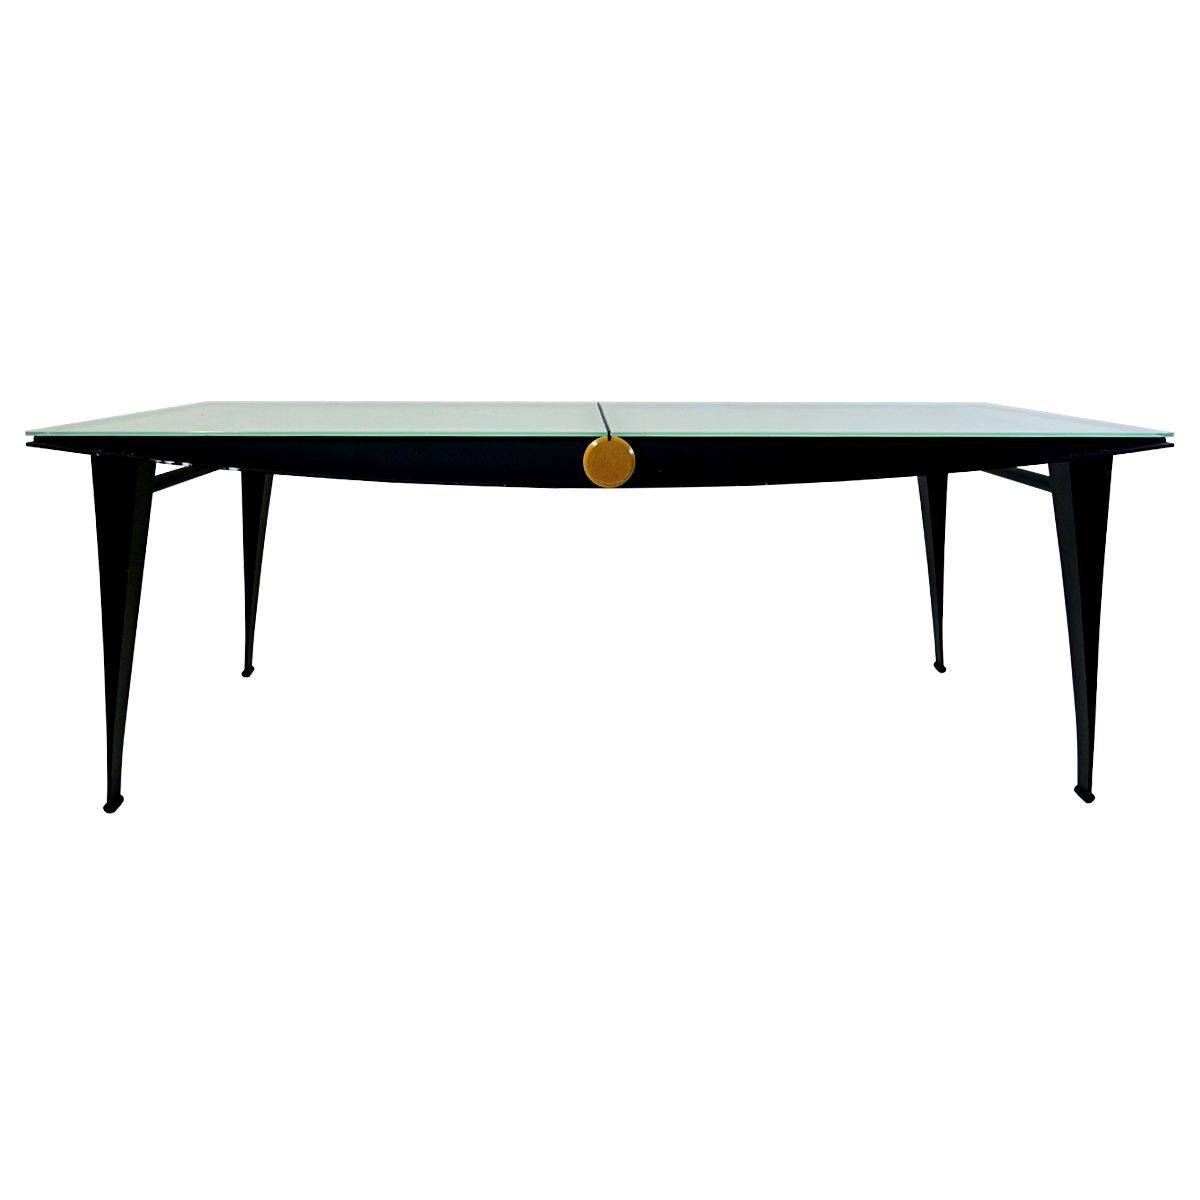 Mid-Century Modern Dining Table with Black Steel Frame and Sandblasted Glass Top